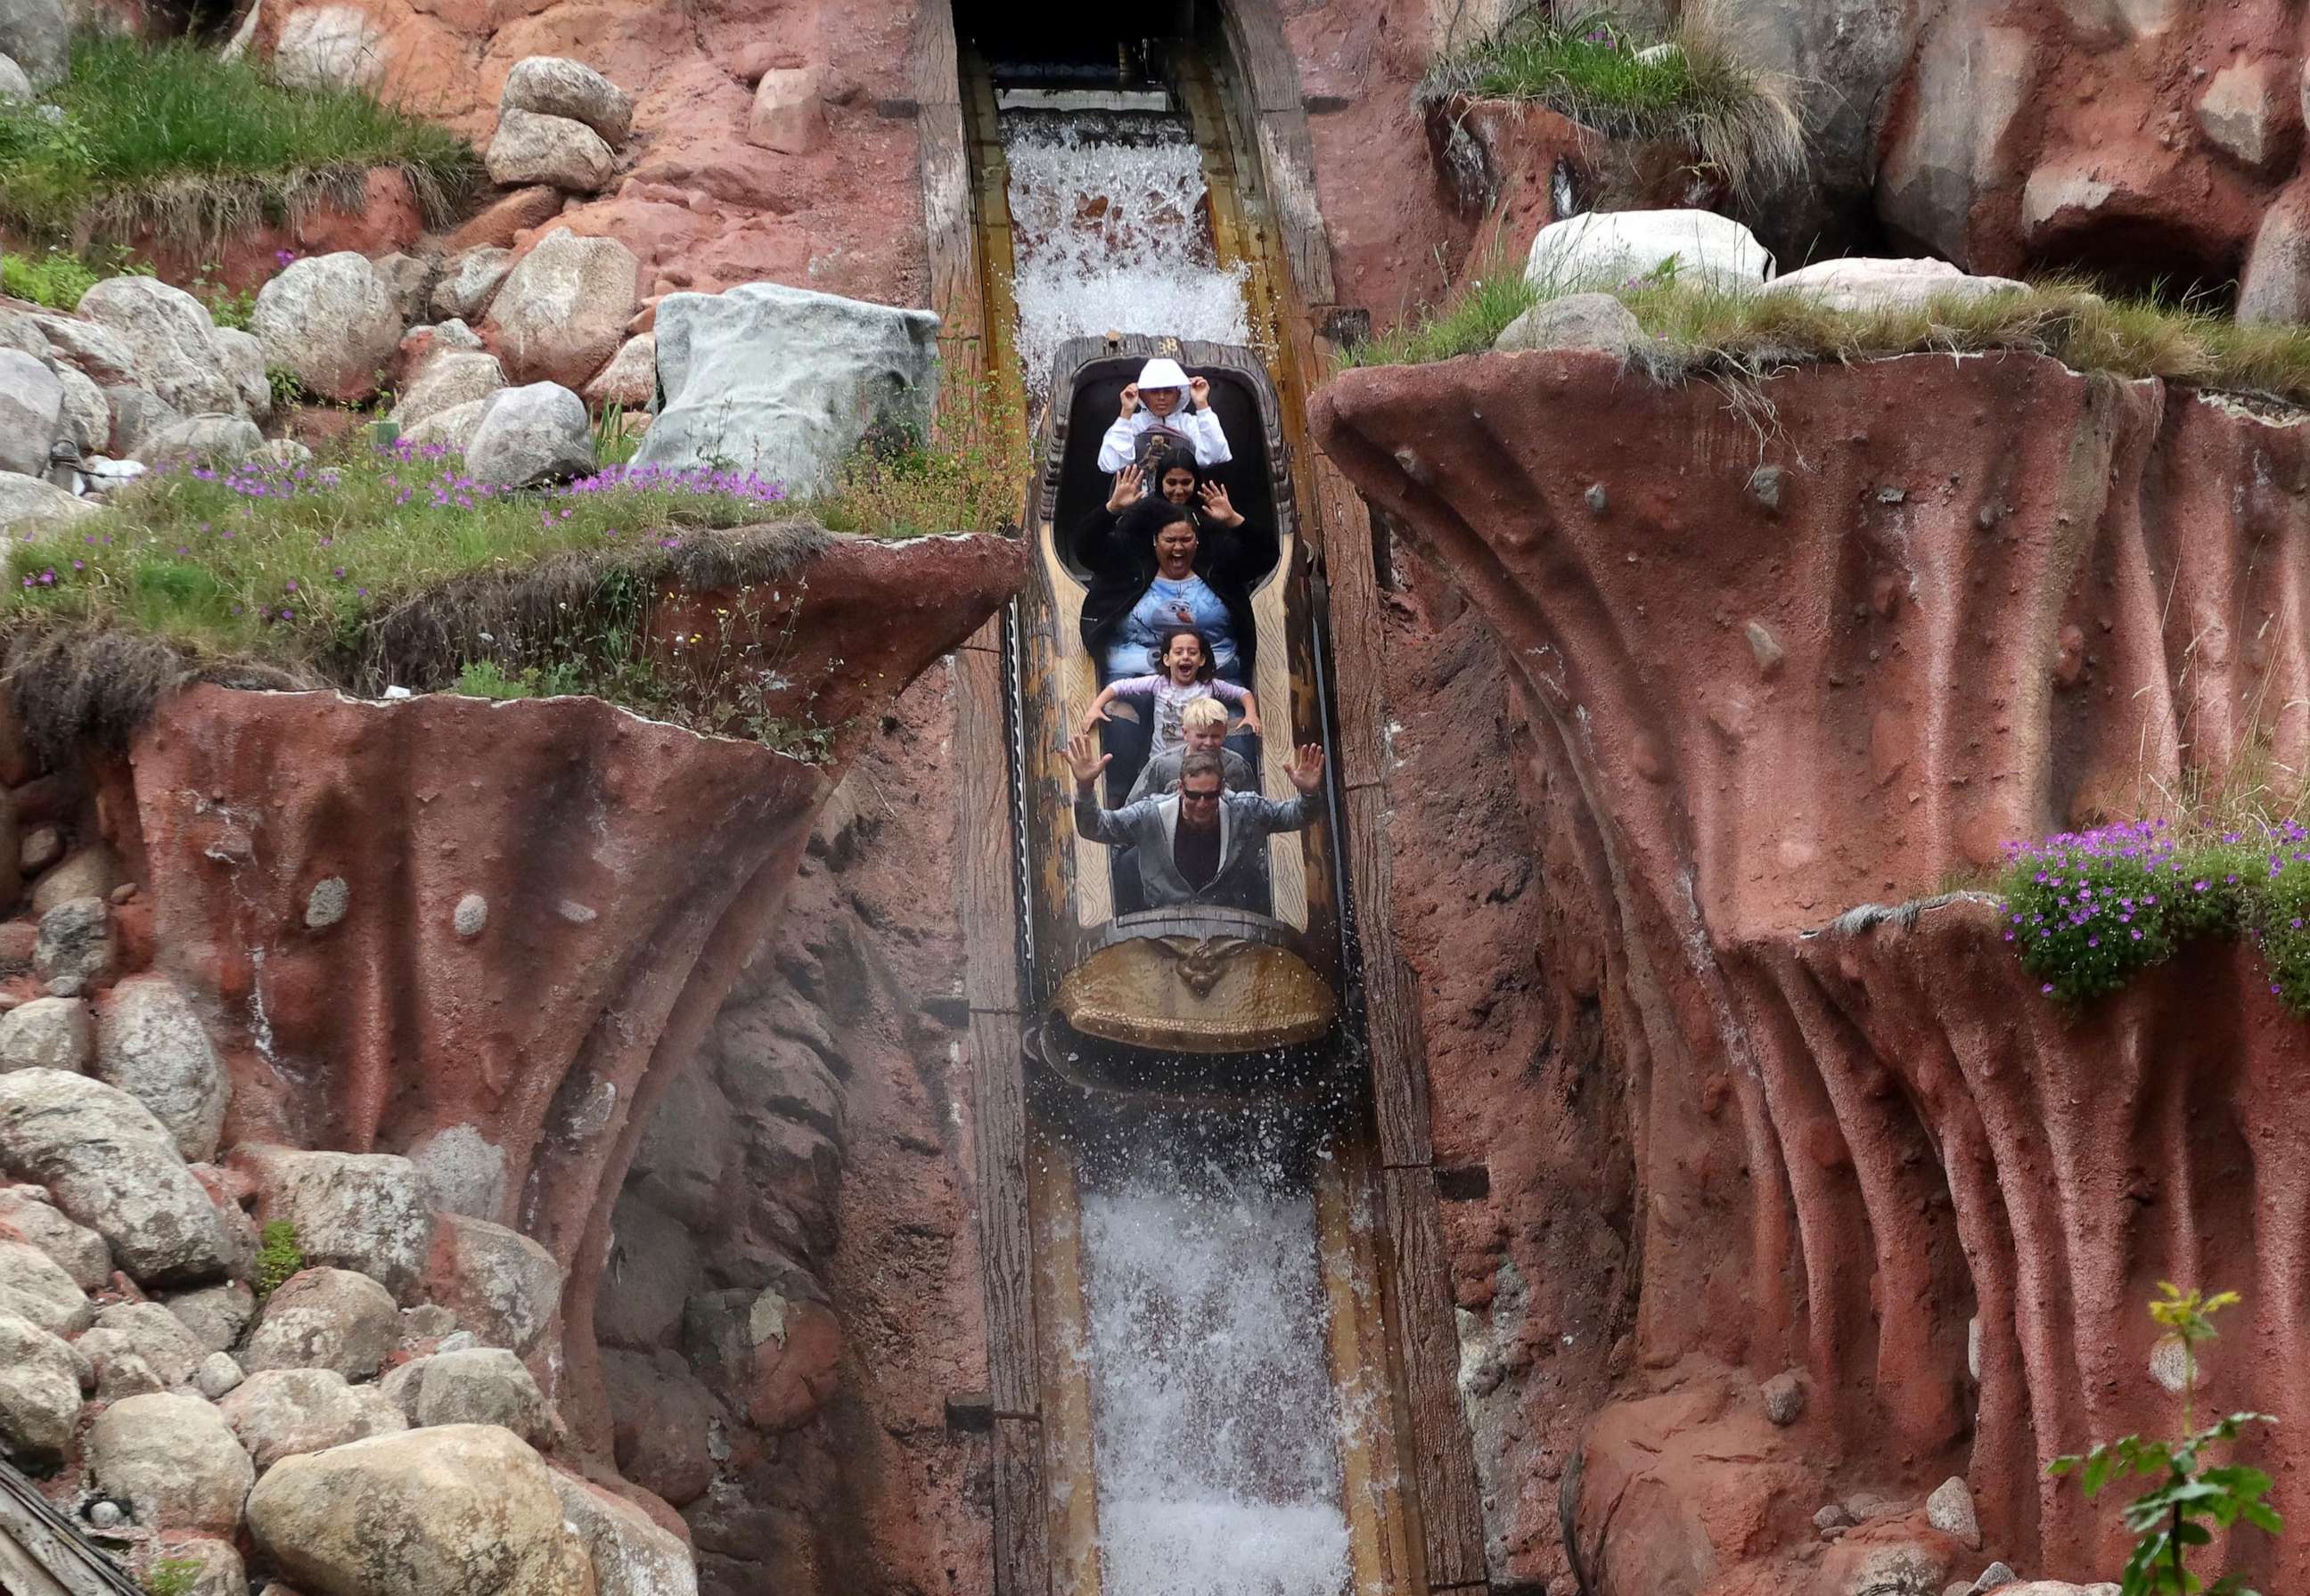 PHOTO: In this April 13, 2023, file photo, people ride the Splash Mountain attraction at the Disneyland theme park in Anaheim, Calif.